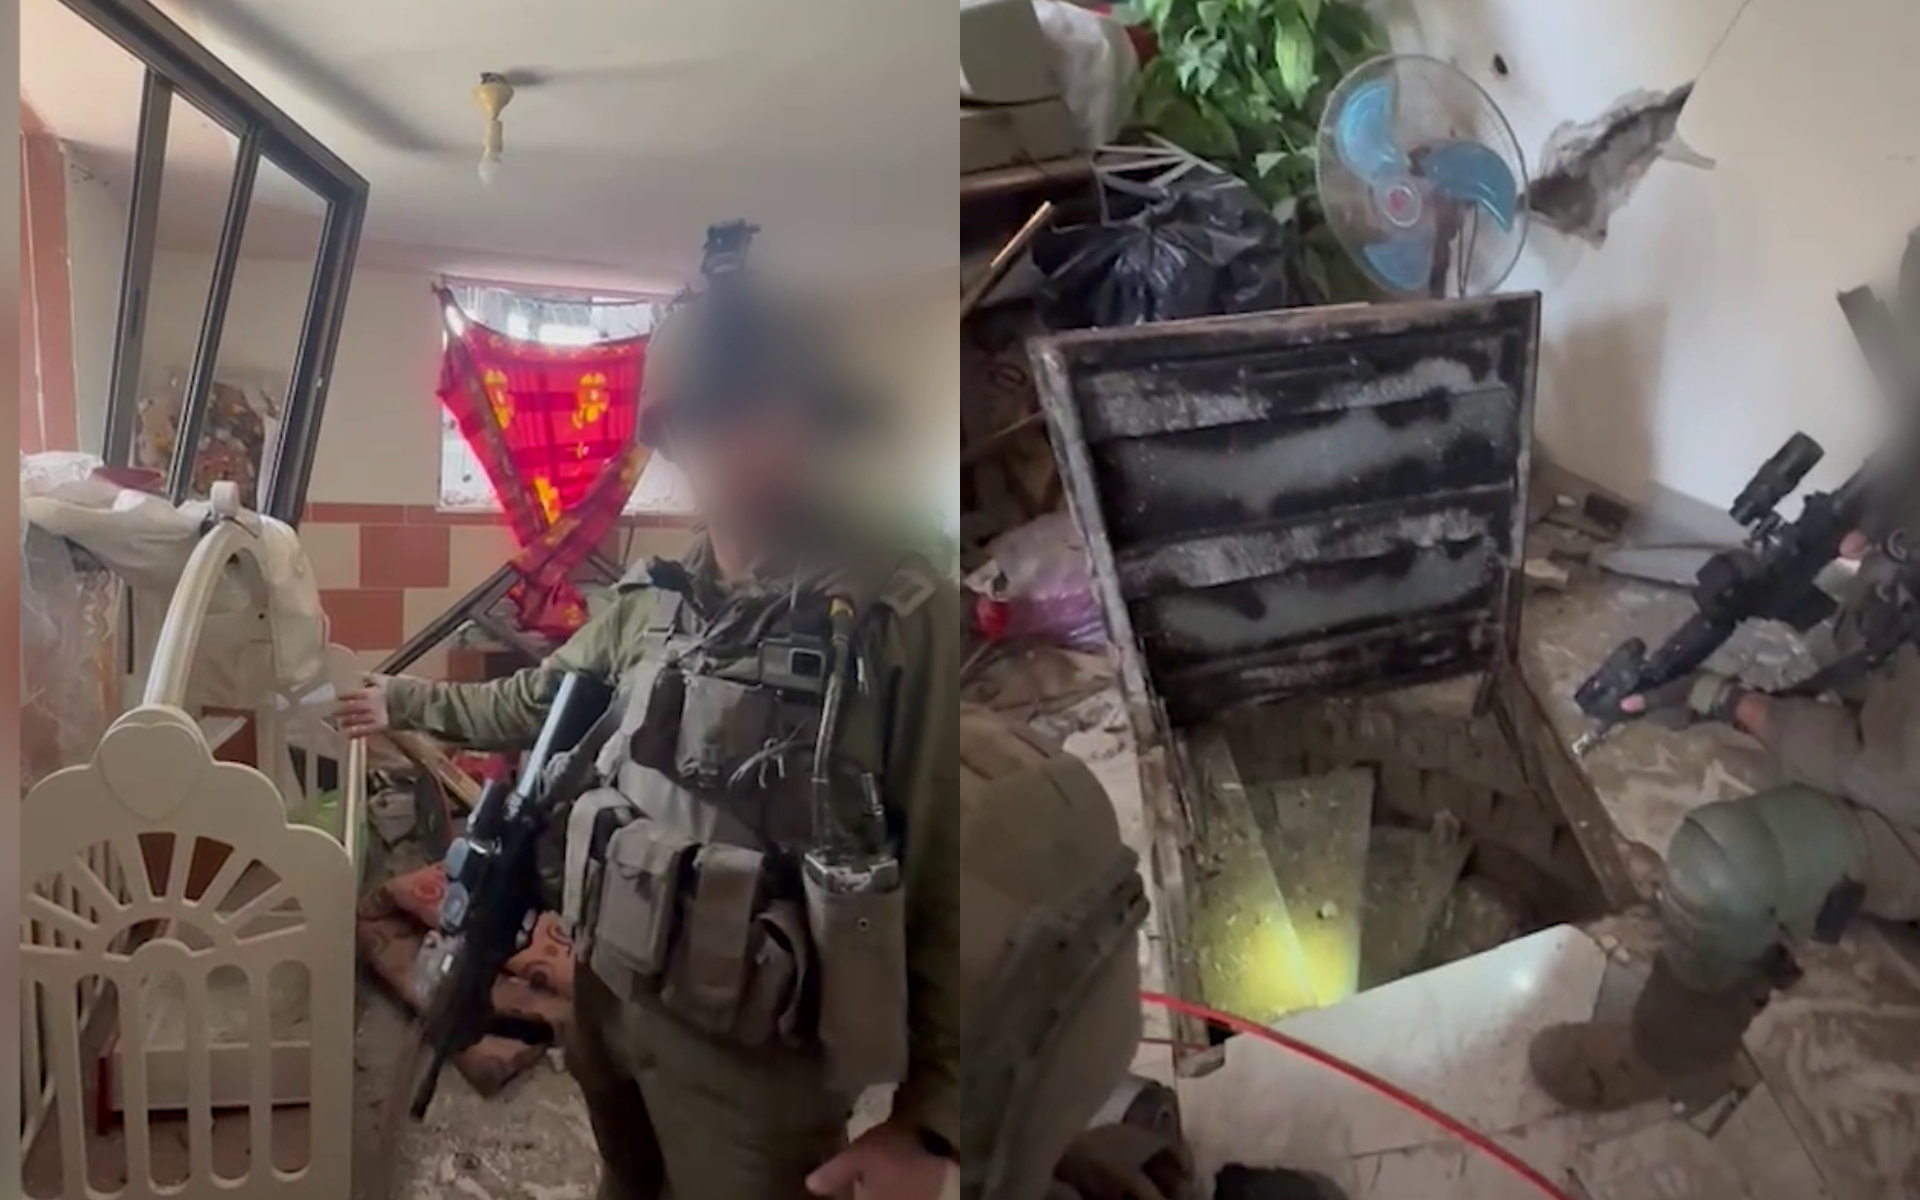 IDF says it uncovered a Hamas tunnel hidden beneath baby's crib in north  Gaza | The Times of Israel